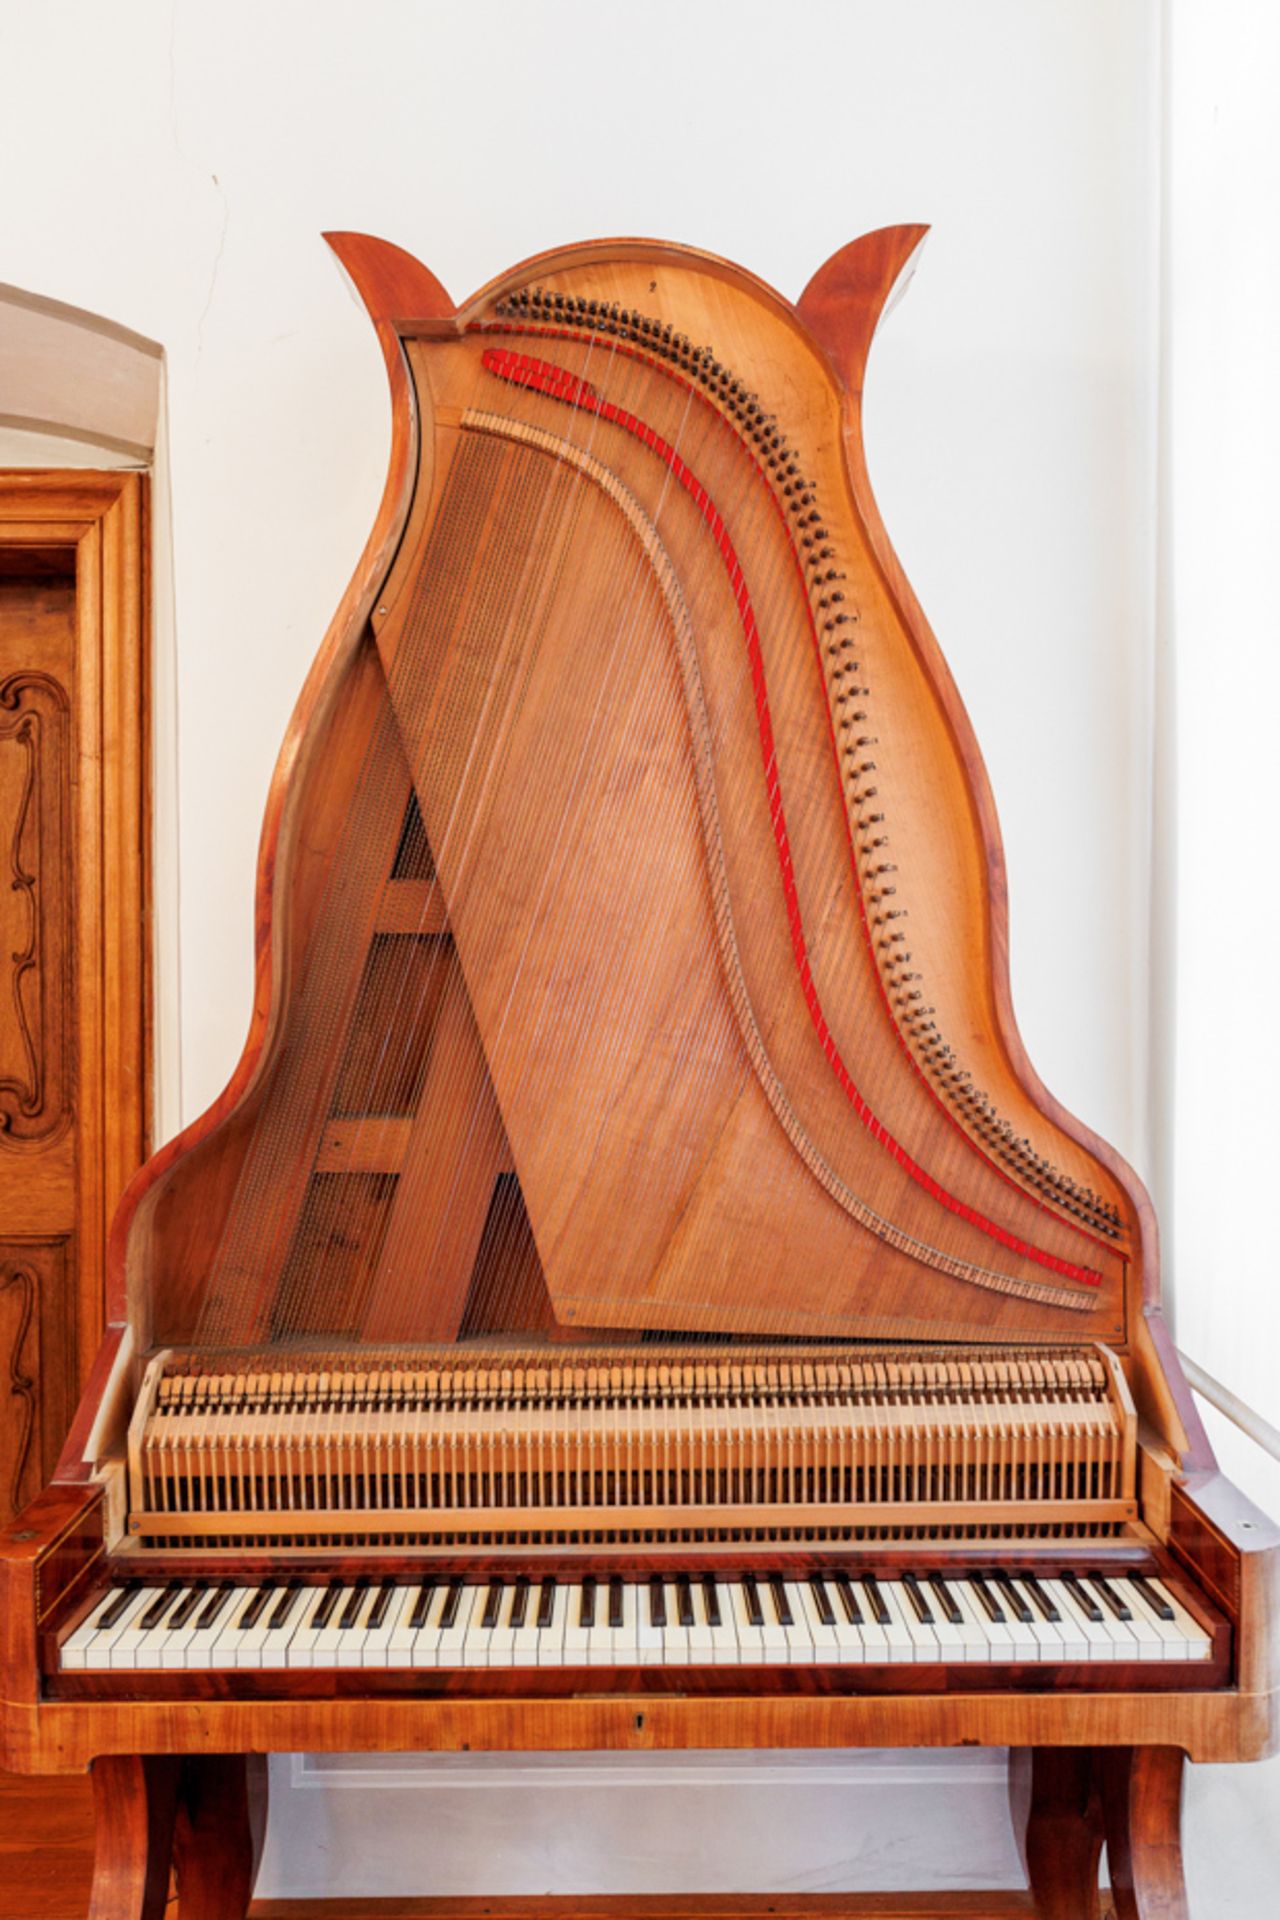 LYRE PIANO SIGNED F.A. KLEIN, BERLIN CIRCA 1830-1835 - Image 3 of 3